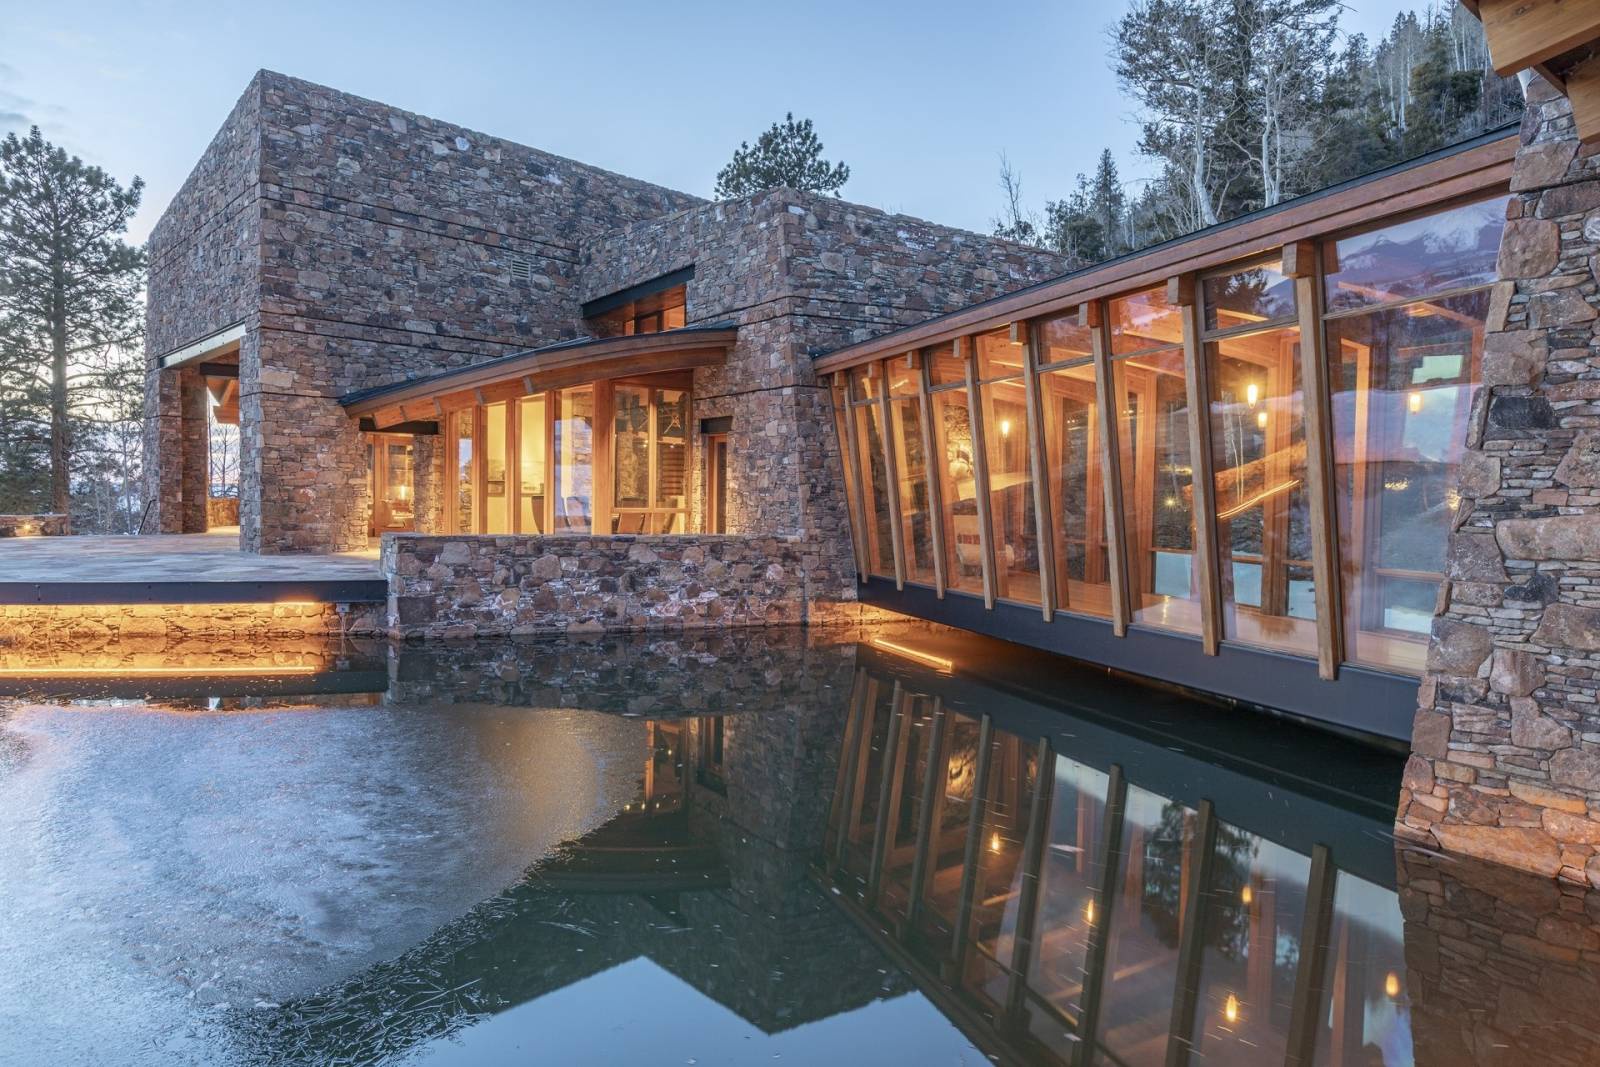 Telluride Vacation Rentals, PaGomo* - Walk across the private bridge to the East Pod to the main master bedroom which basks in the natural sunlight with panoramic views of the majestic San Juan Mountains and trout pond underway.